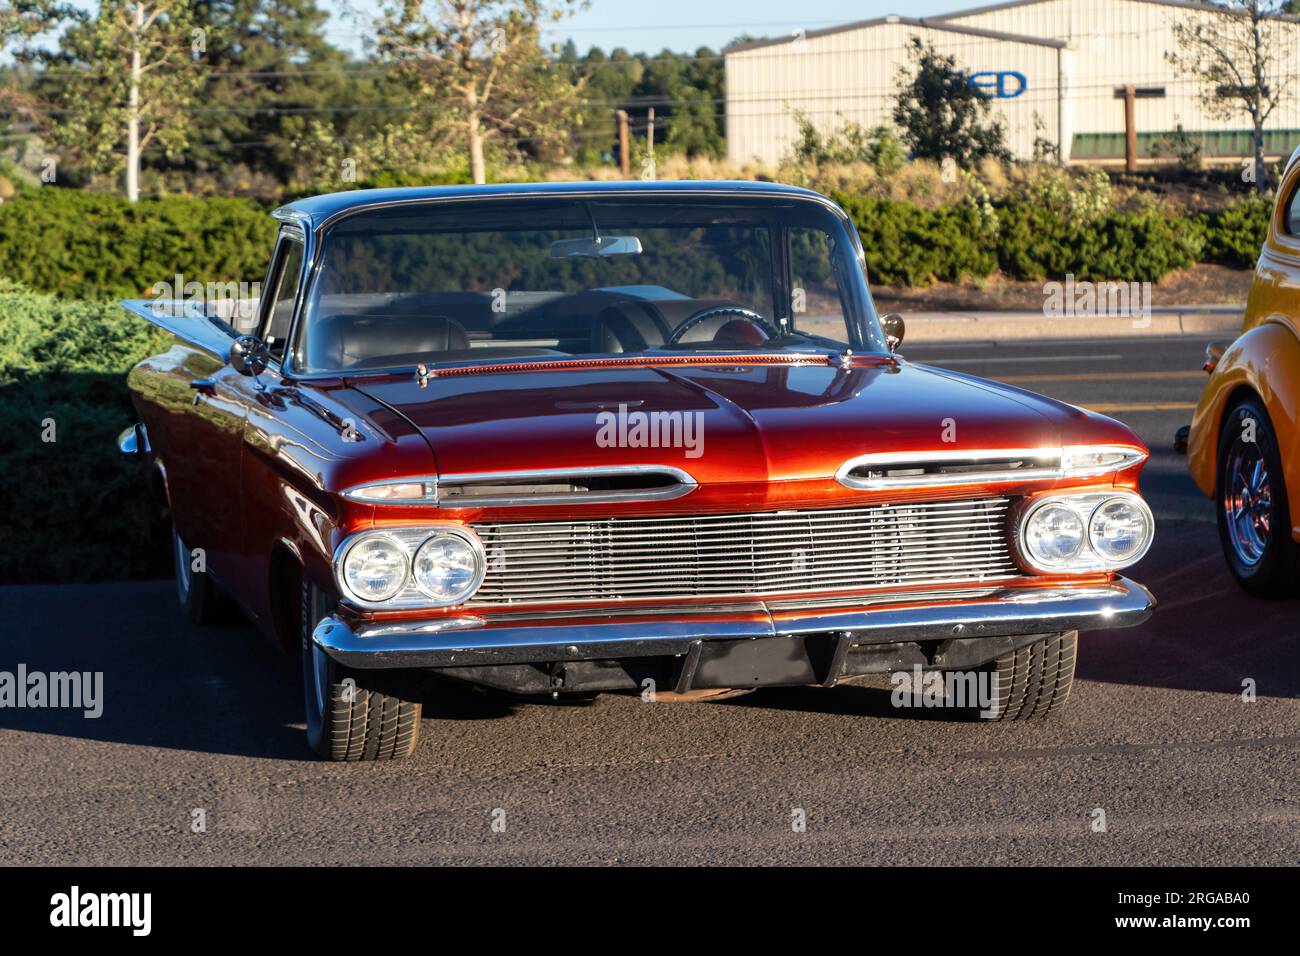 vintage classic american 1959 Chevrolet El Camino car at car meet in Flagstaff Arizona on Route 66 Stock Photo